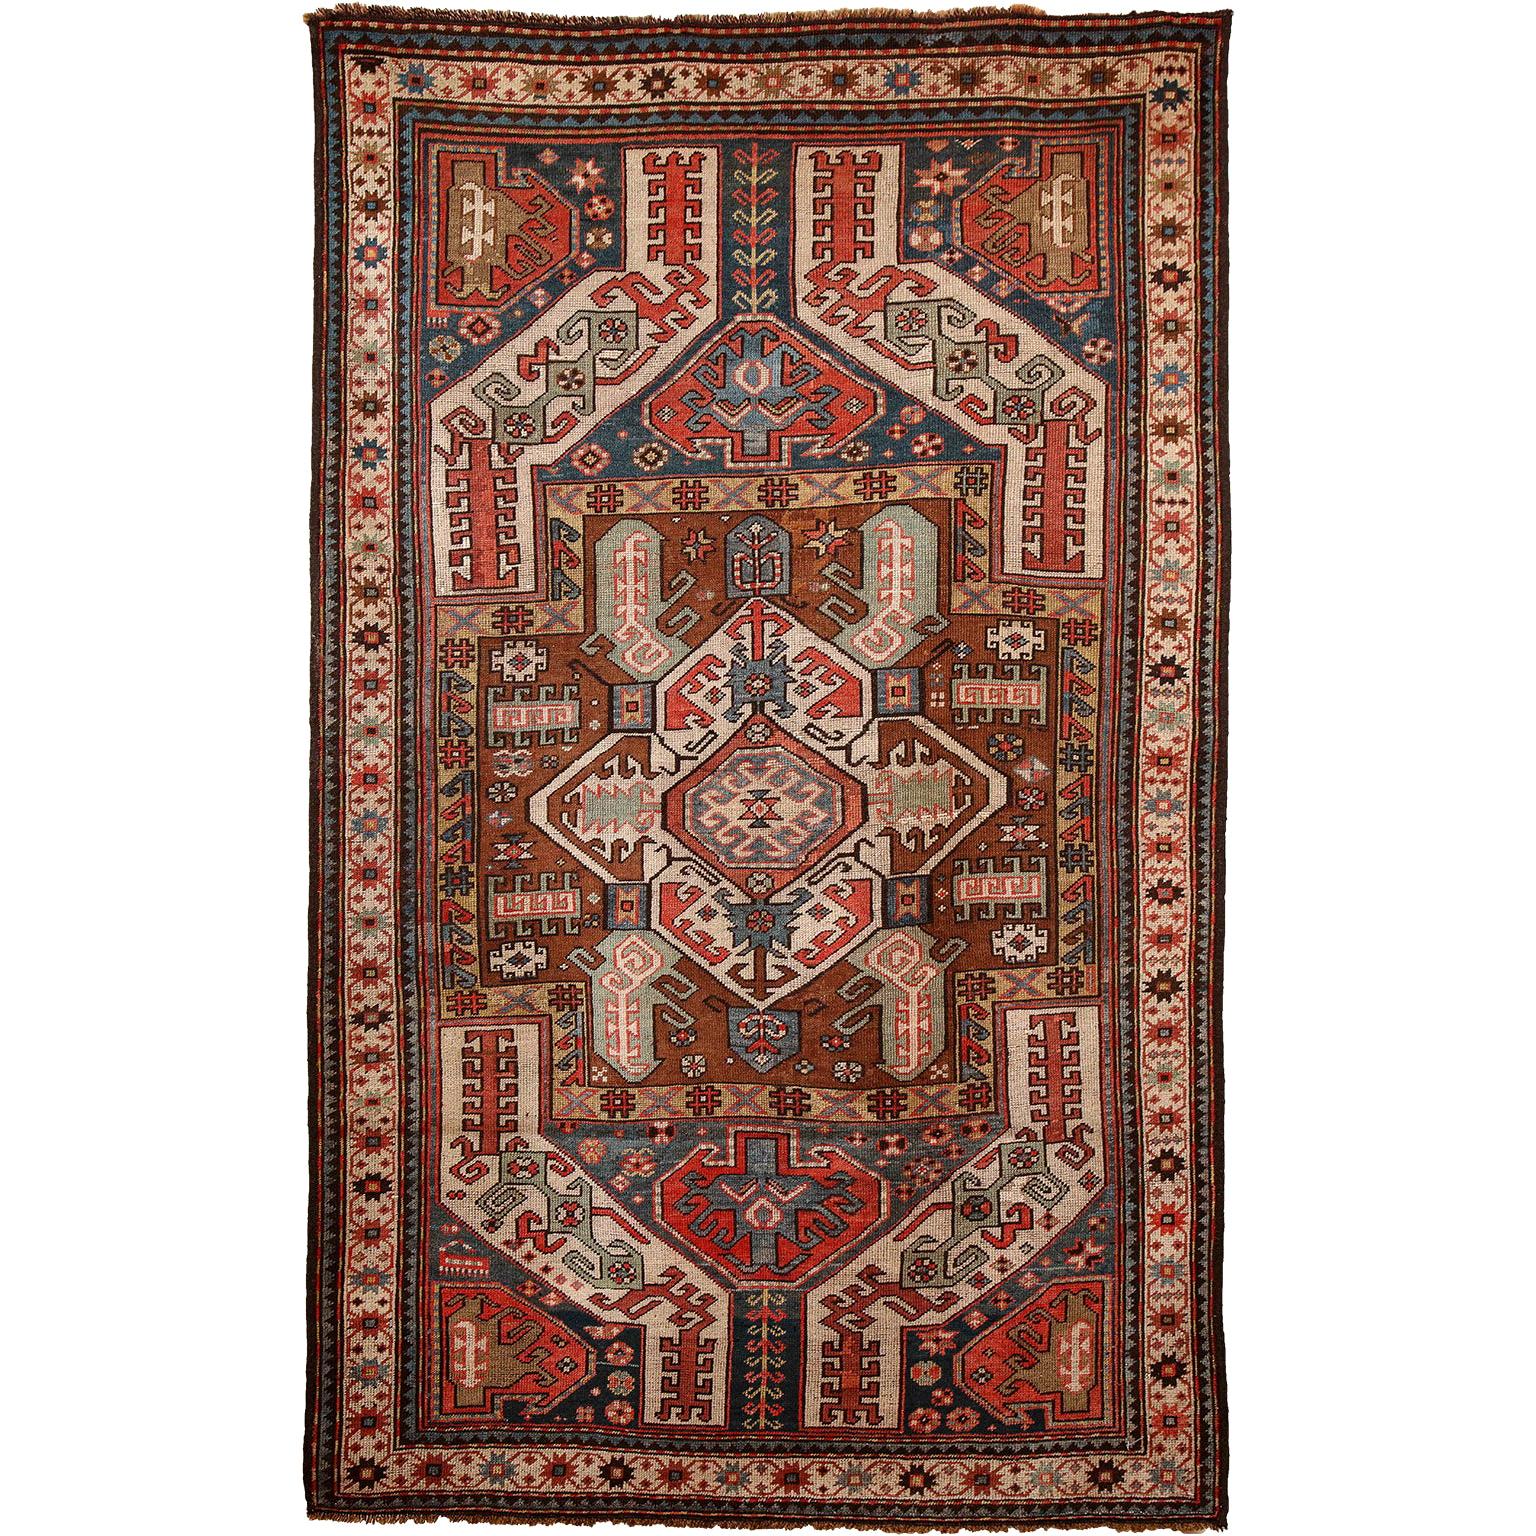 Antique 1880s Caucasian Rug, Hand-knotted Wool, Blue, Green, Red, 4' x 6'